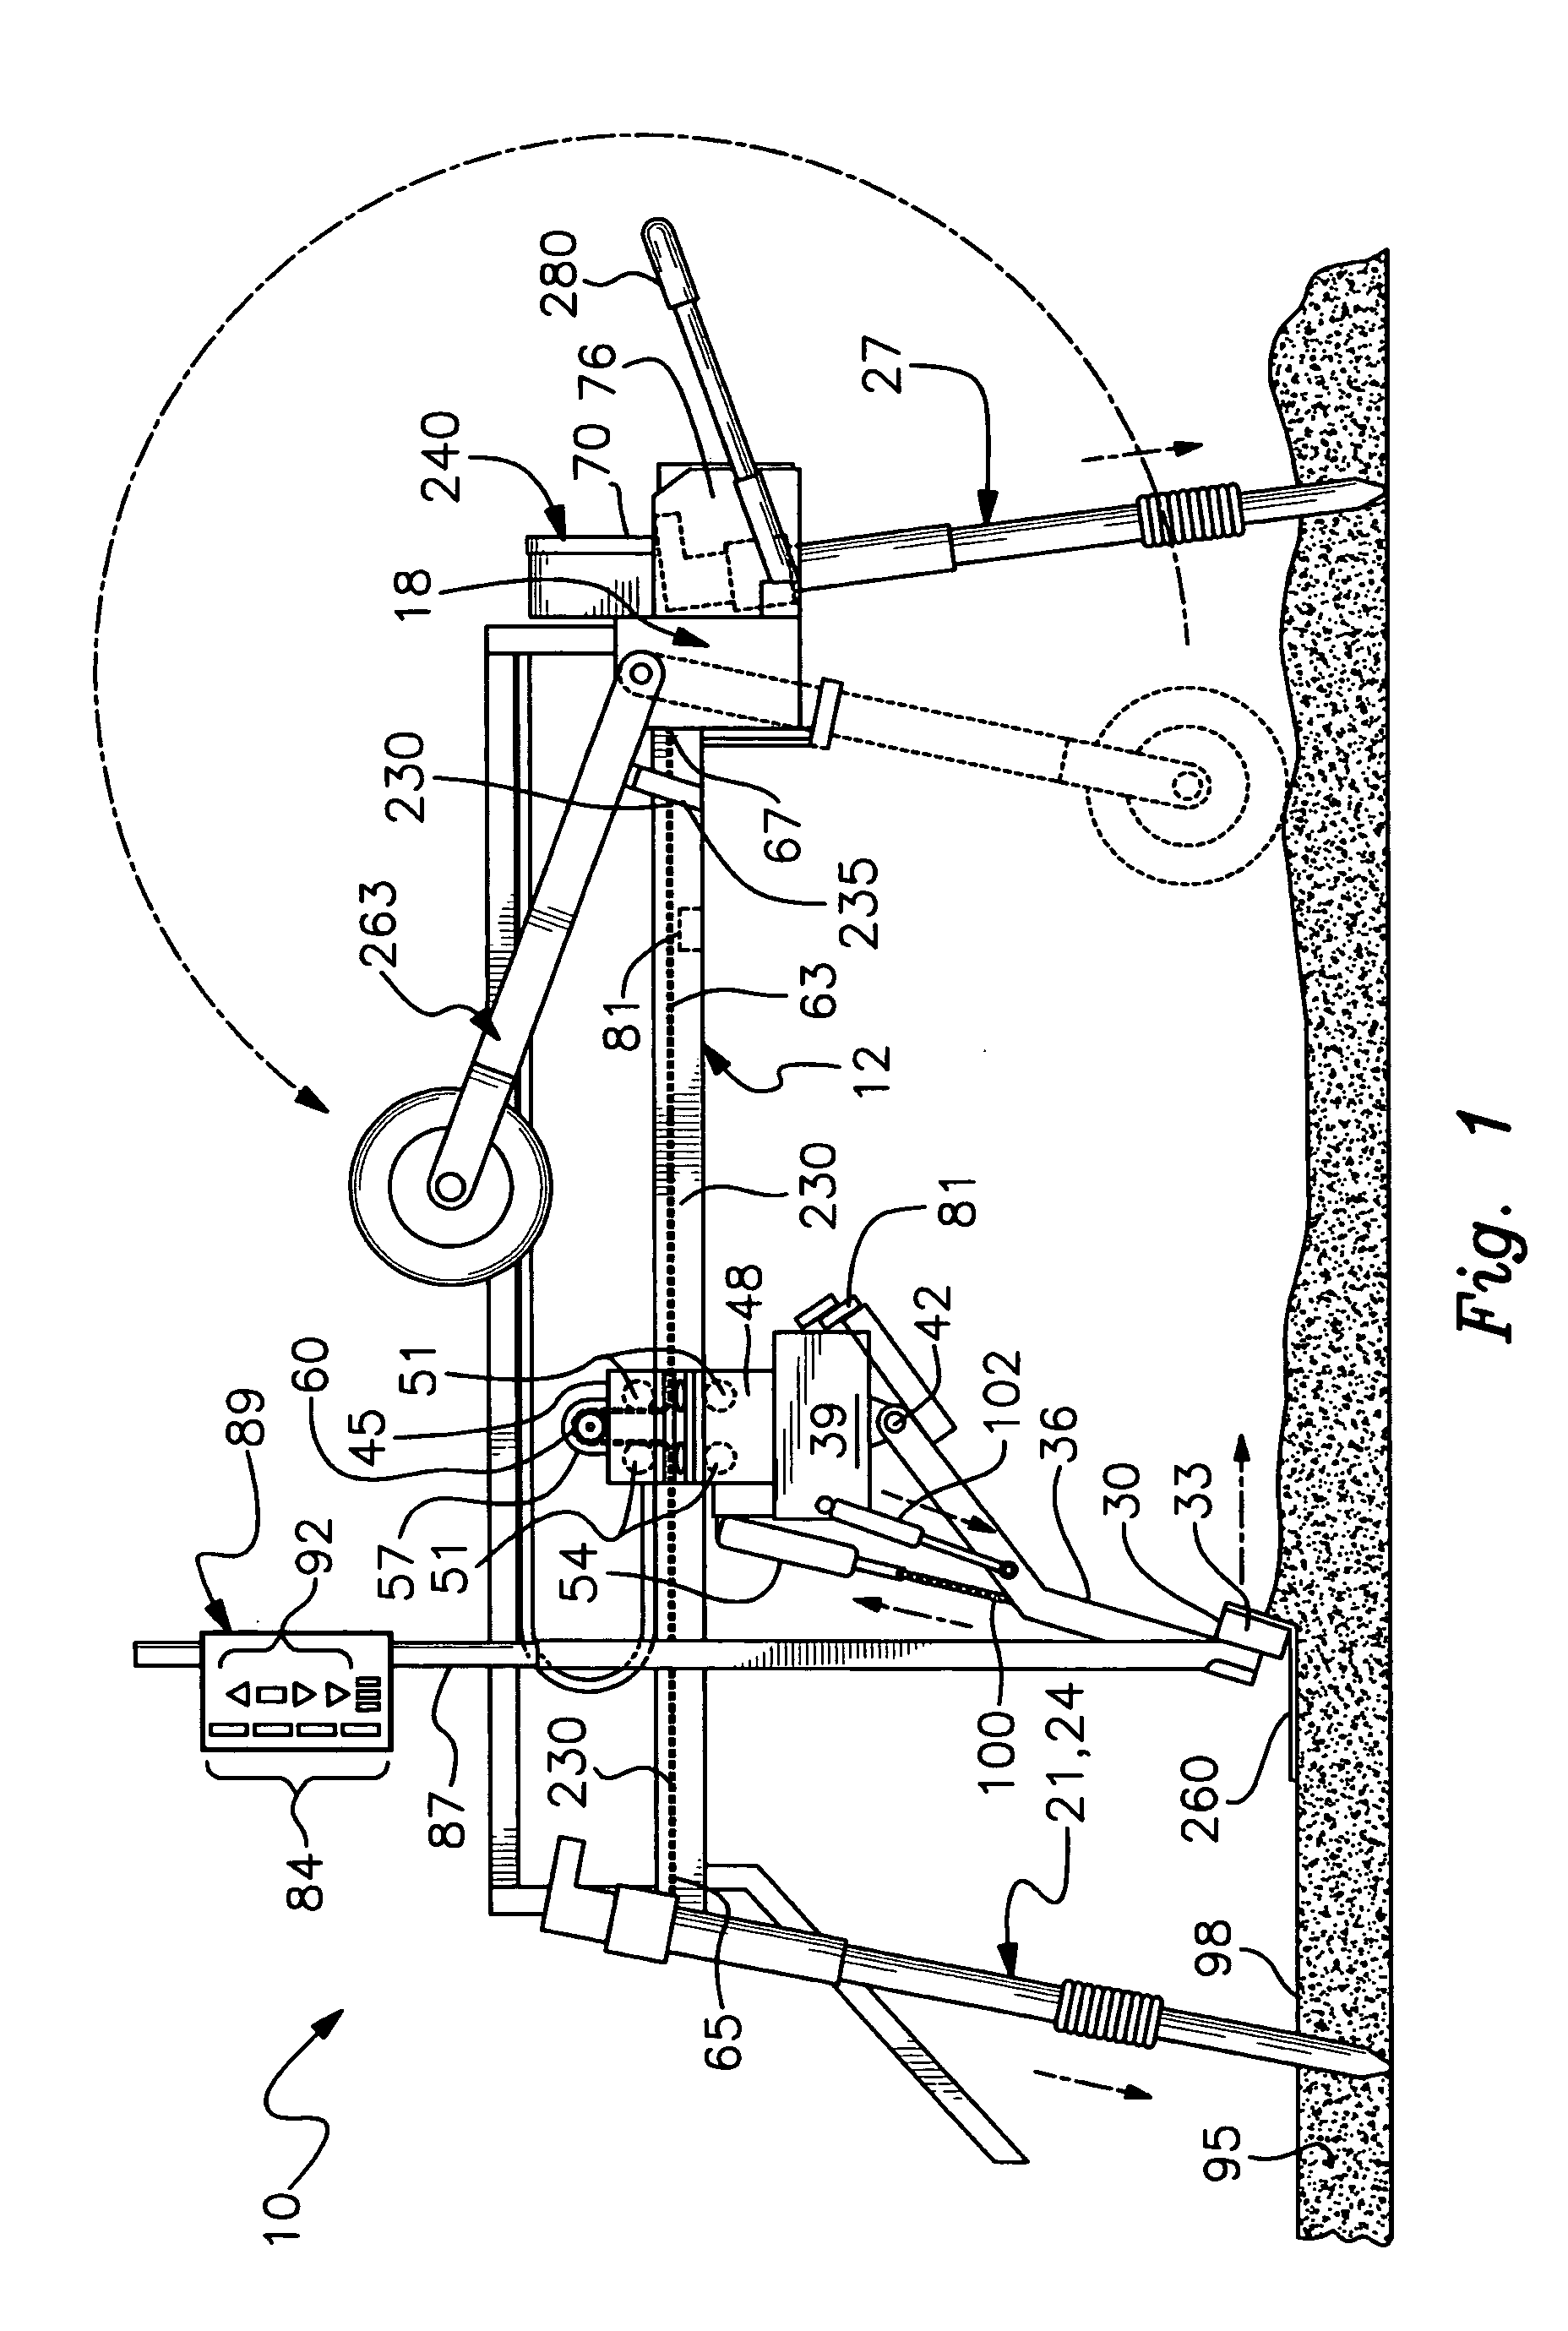 Lightweight self-leveling automatic screed apparatus